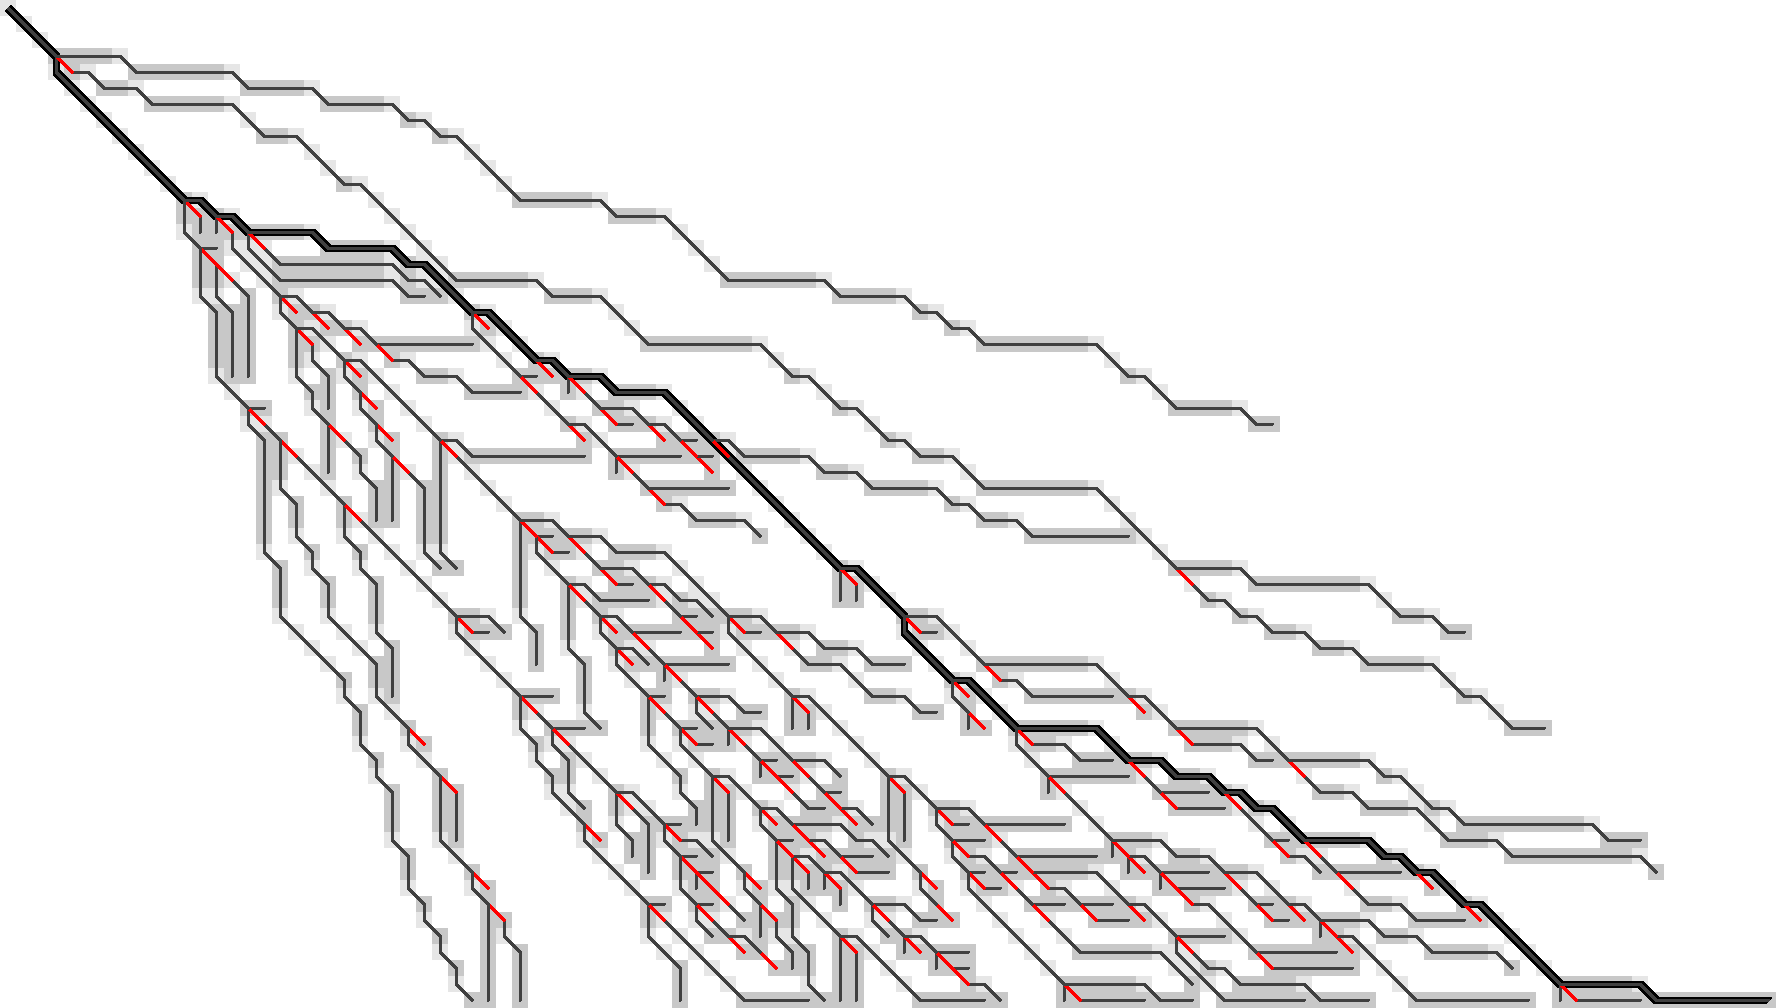 Figure 9: WFA on two sequences made of (11) and (6) copies of a repeating pattern with (20%) mutations applied to each. F.r. states are grey, and extended states are lighter grey. Substitutions on the tracebacks are red. Click the image to open a larger version in a new tab.